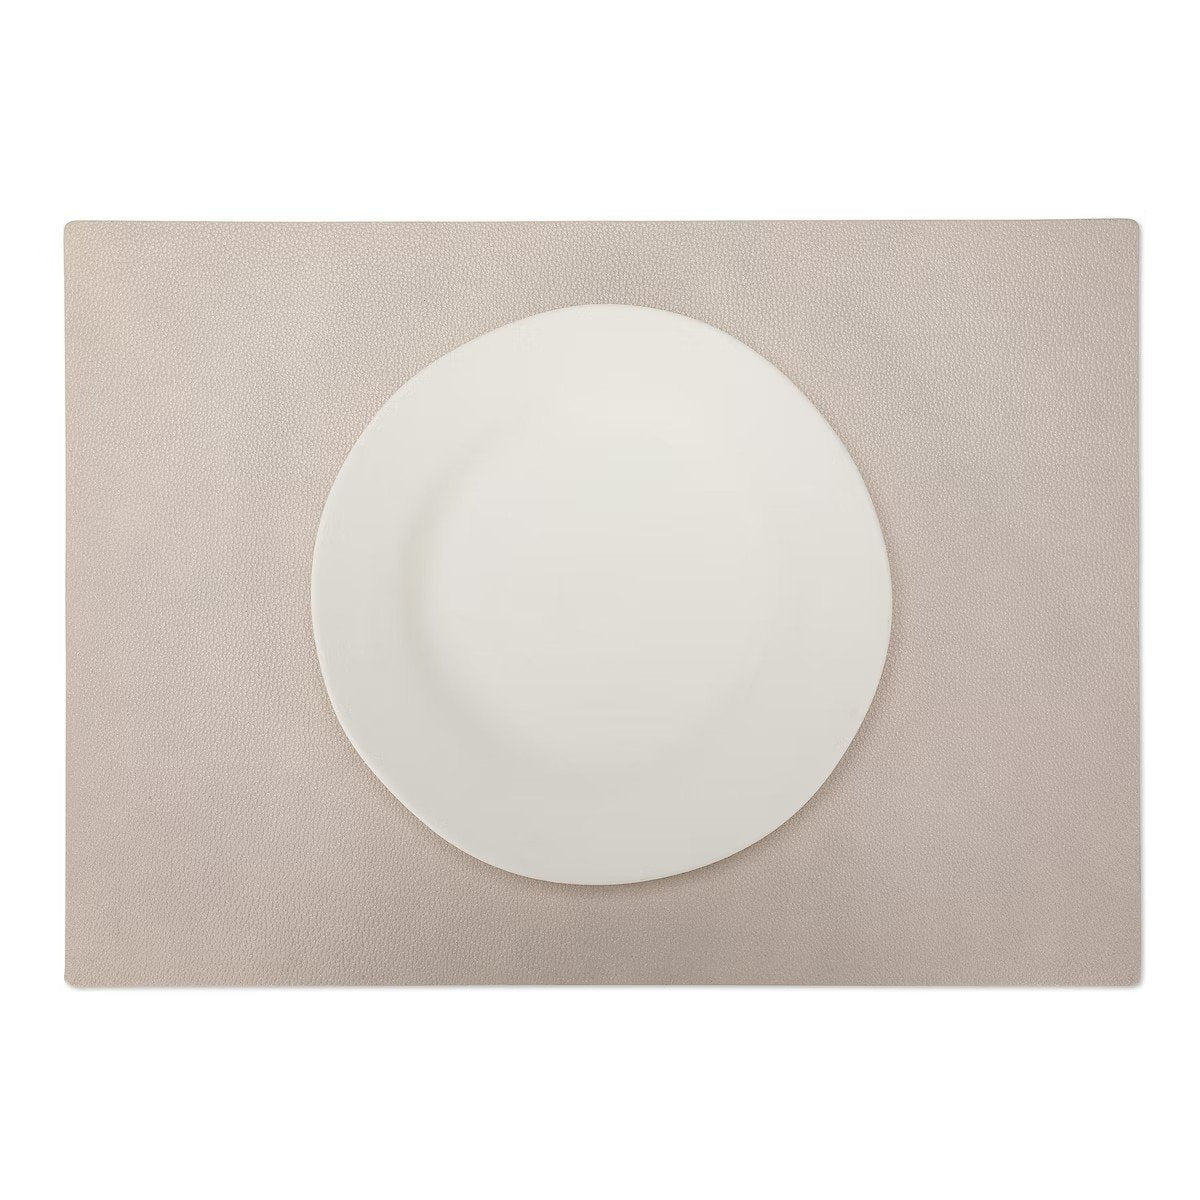 A large rectangular textured washable paper placemat in beige is shown under a white plate.